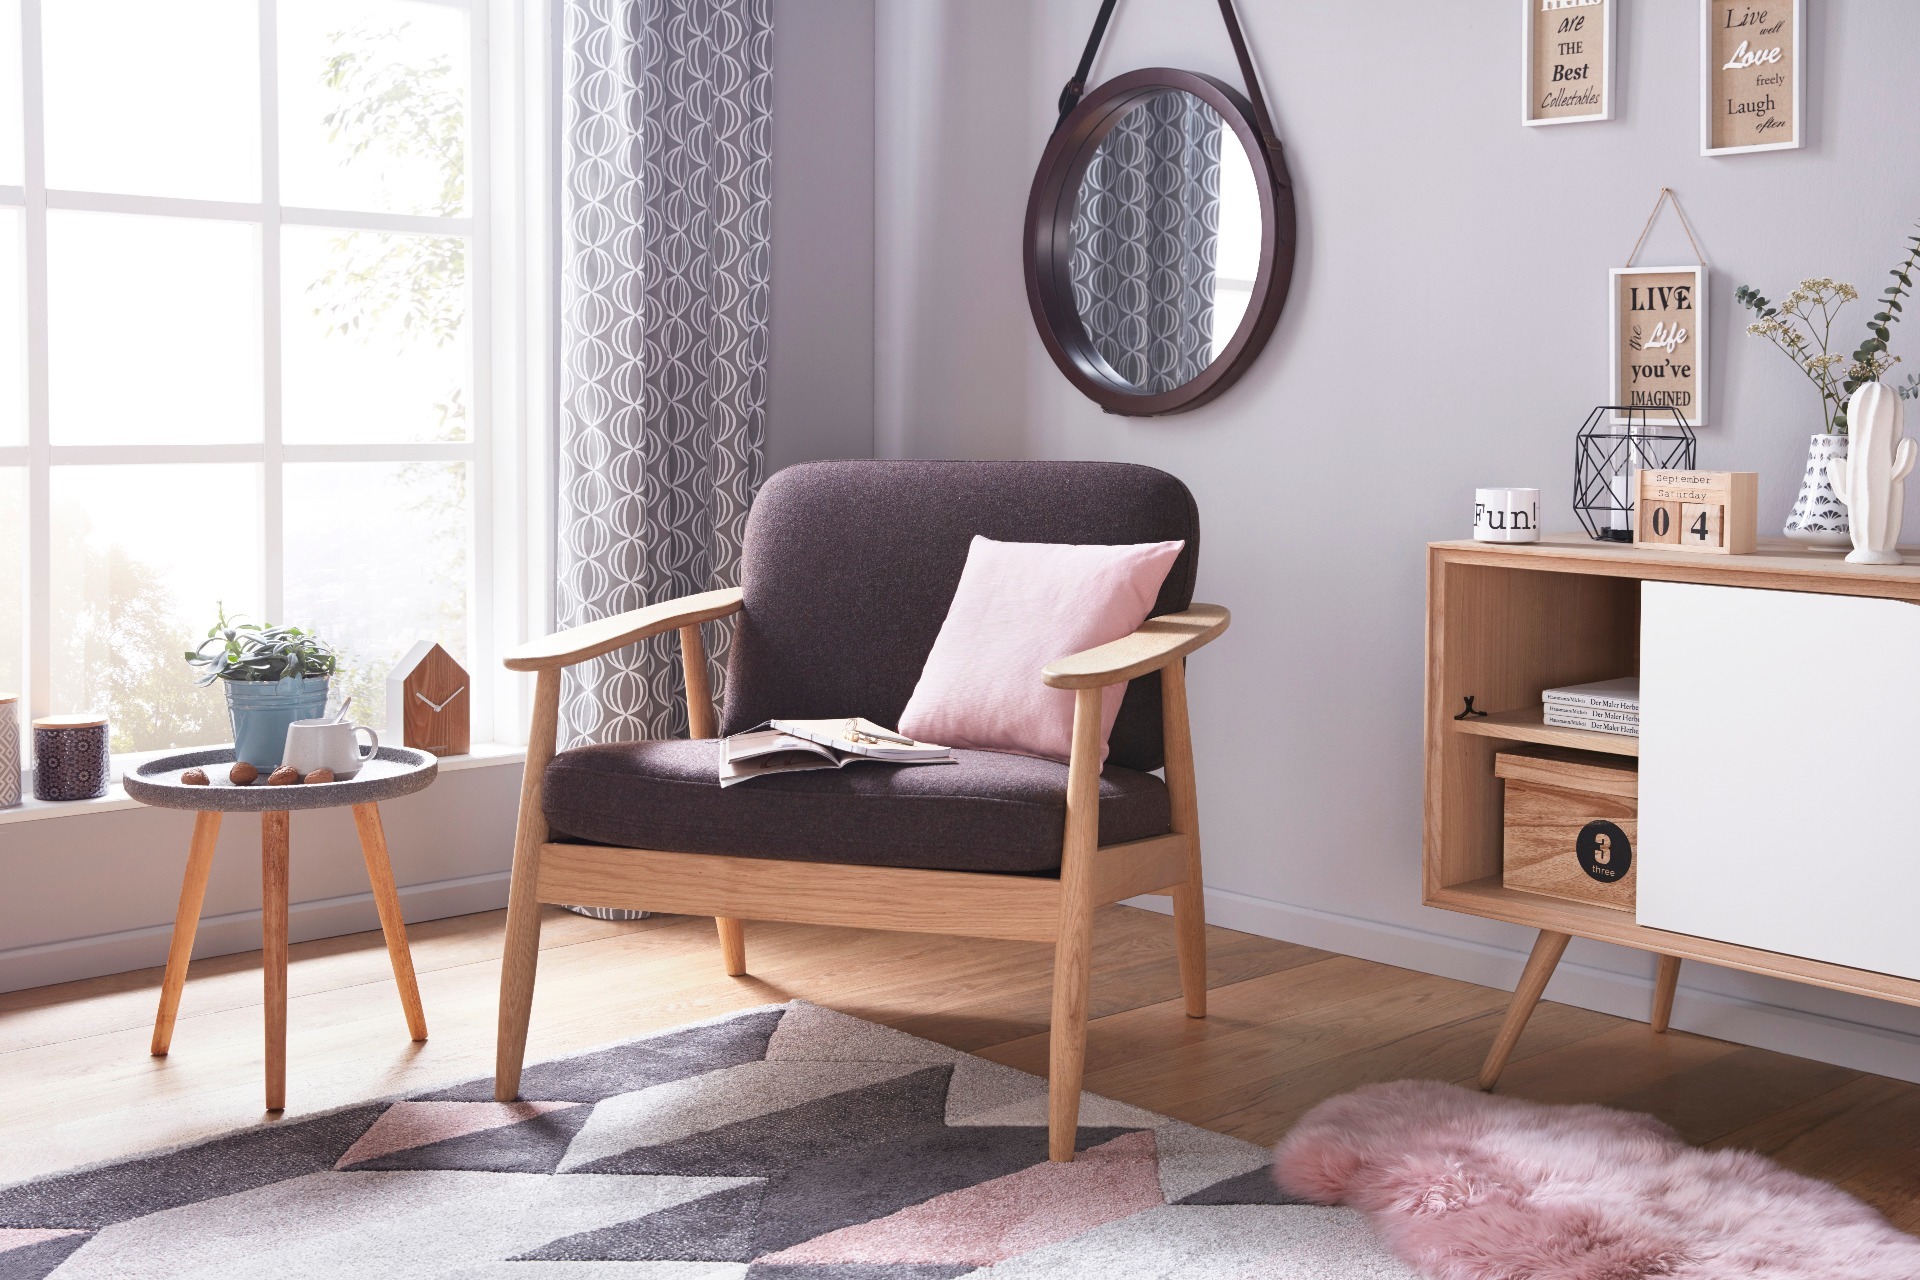 Every third German buys furniture on the Internet